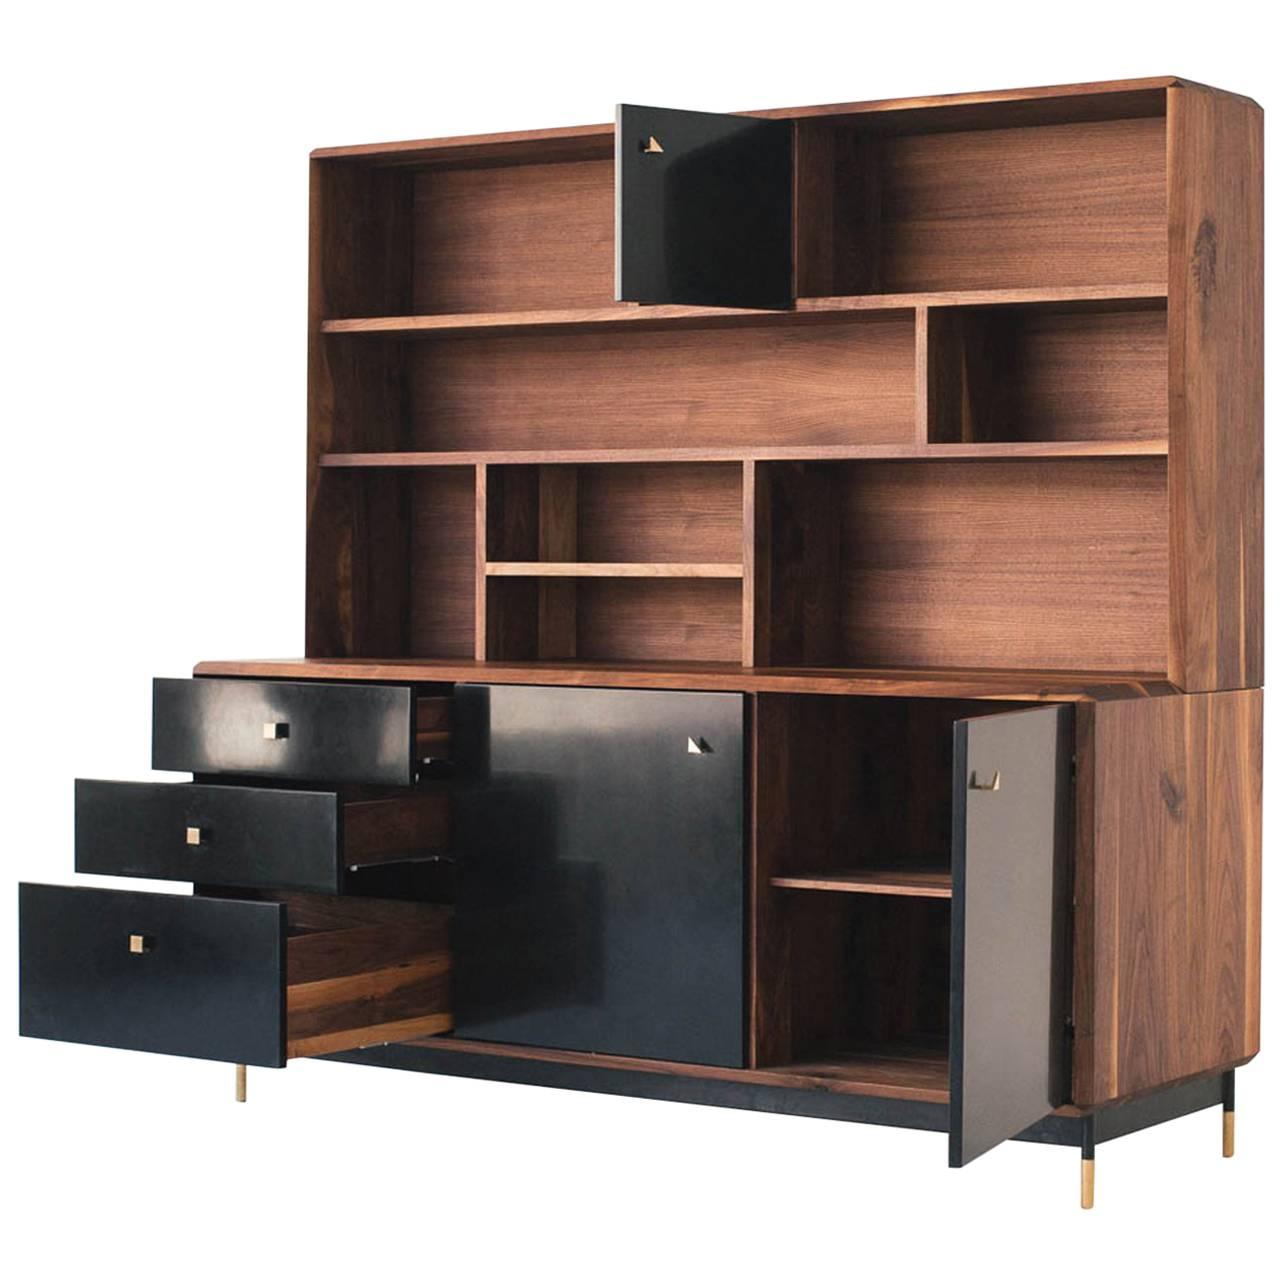 With a traditional footprint and a contemporary, minimal aesthetic, the Mandelbrot Hutch is an impressive and stately piece that will stand proudly anywhere in the home. The Mandelbrot Hutch is the flagship casework piece in the Mandelbrot line and